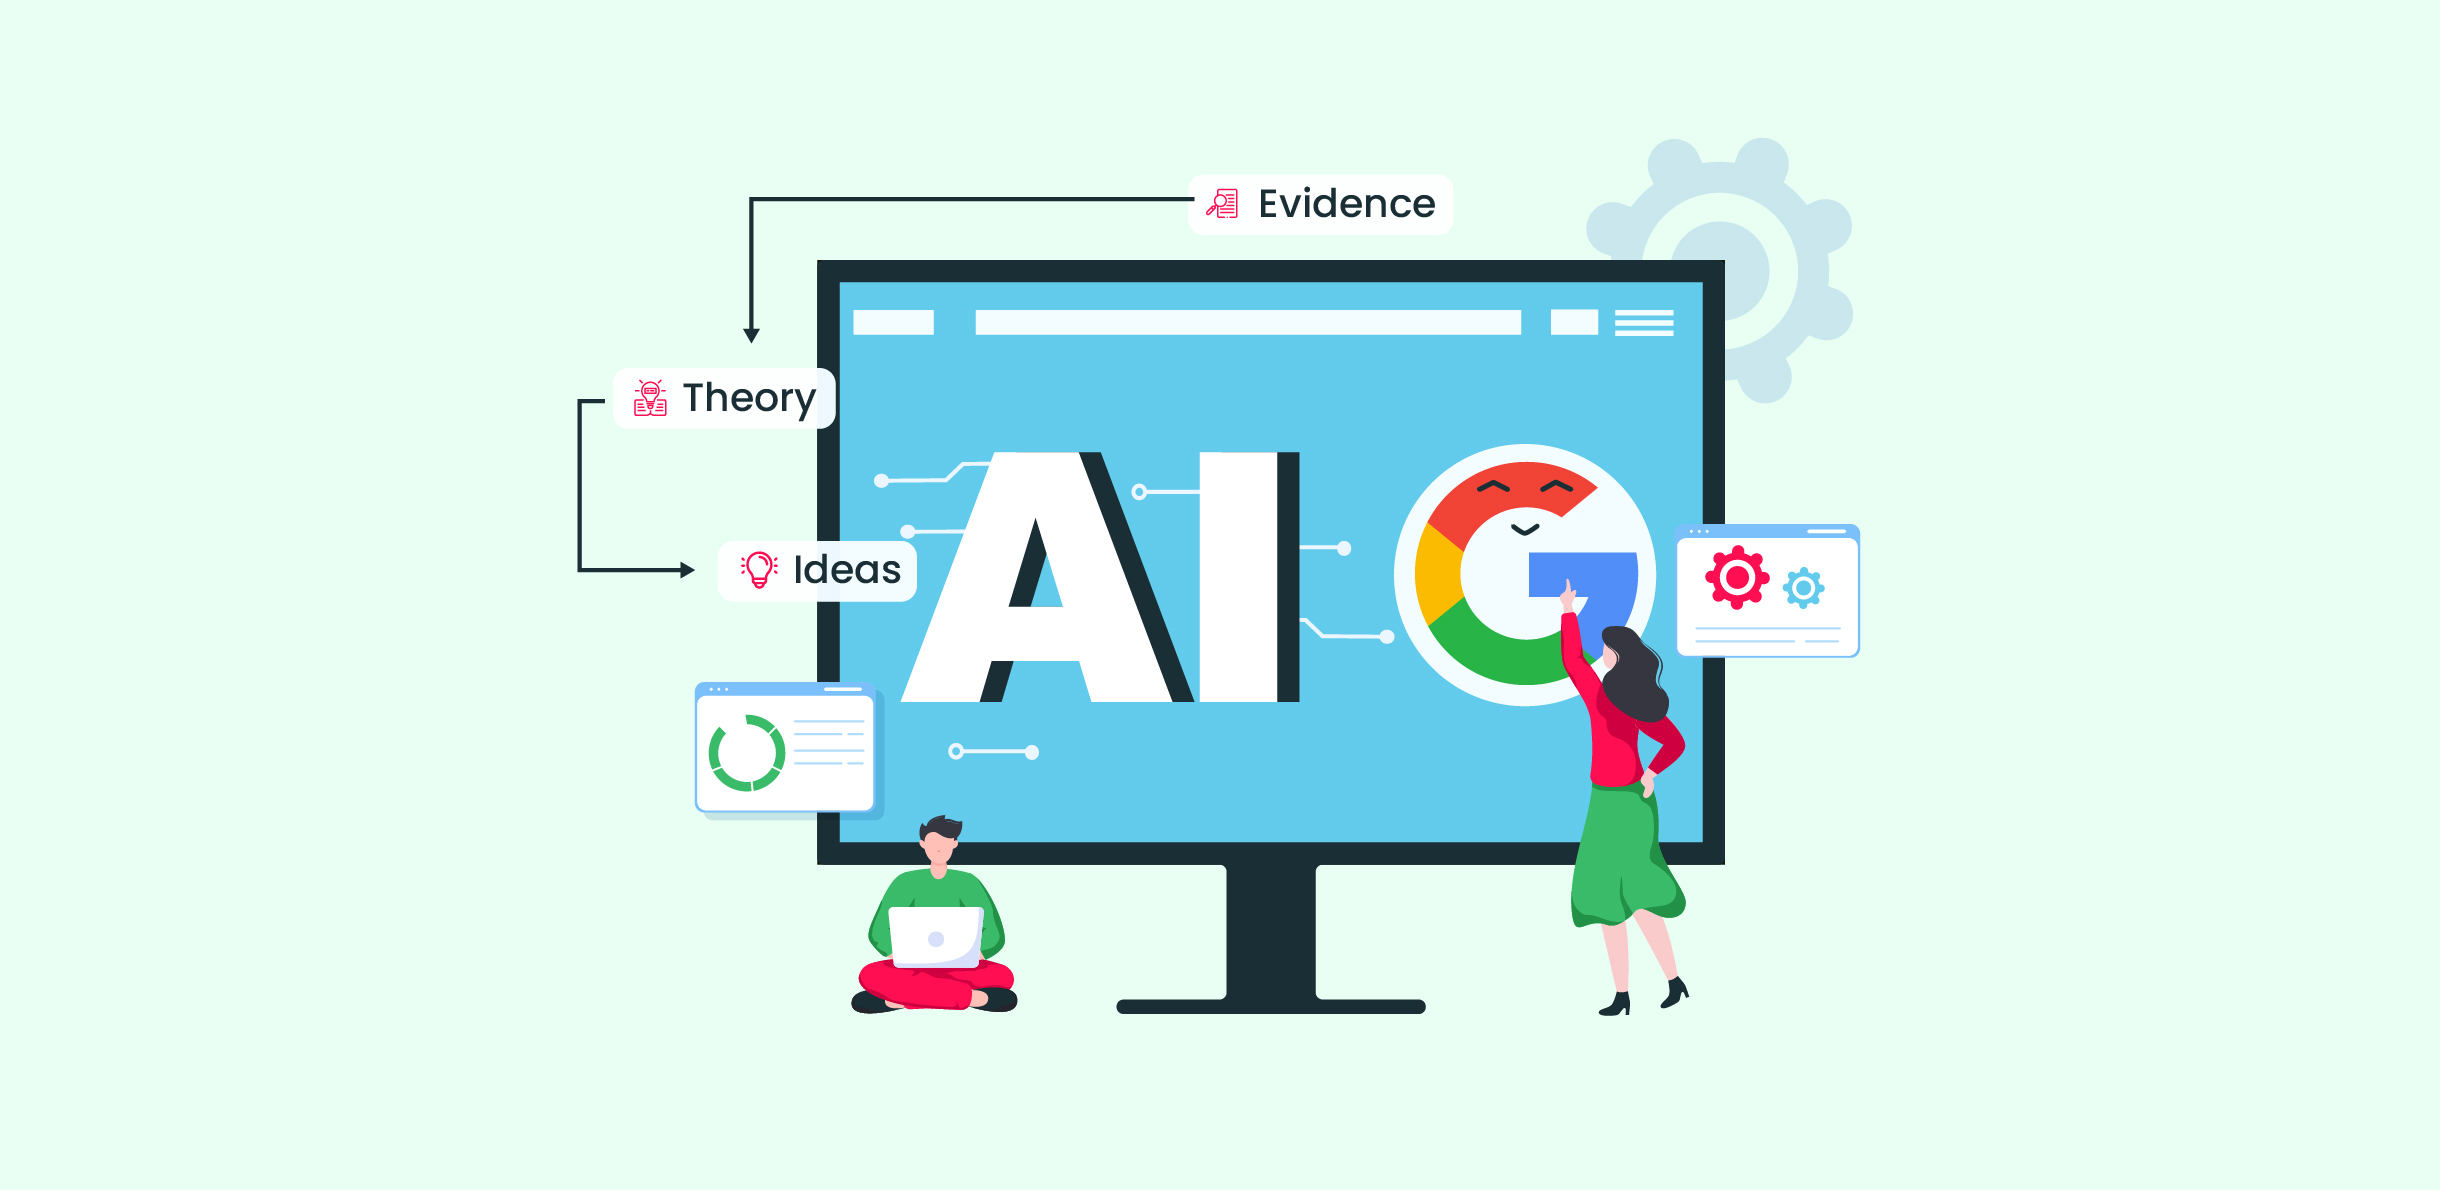 Google’s Stance on AI Generated Content: Evidence, Theory & Ideas